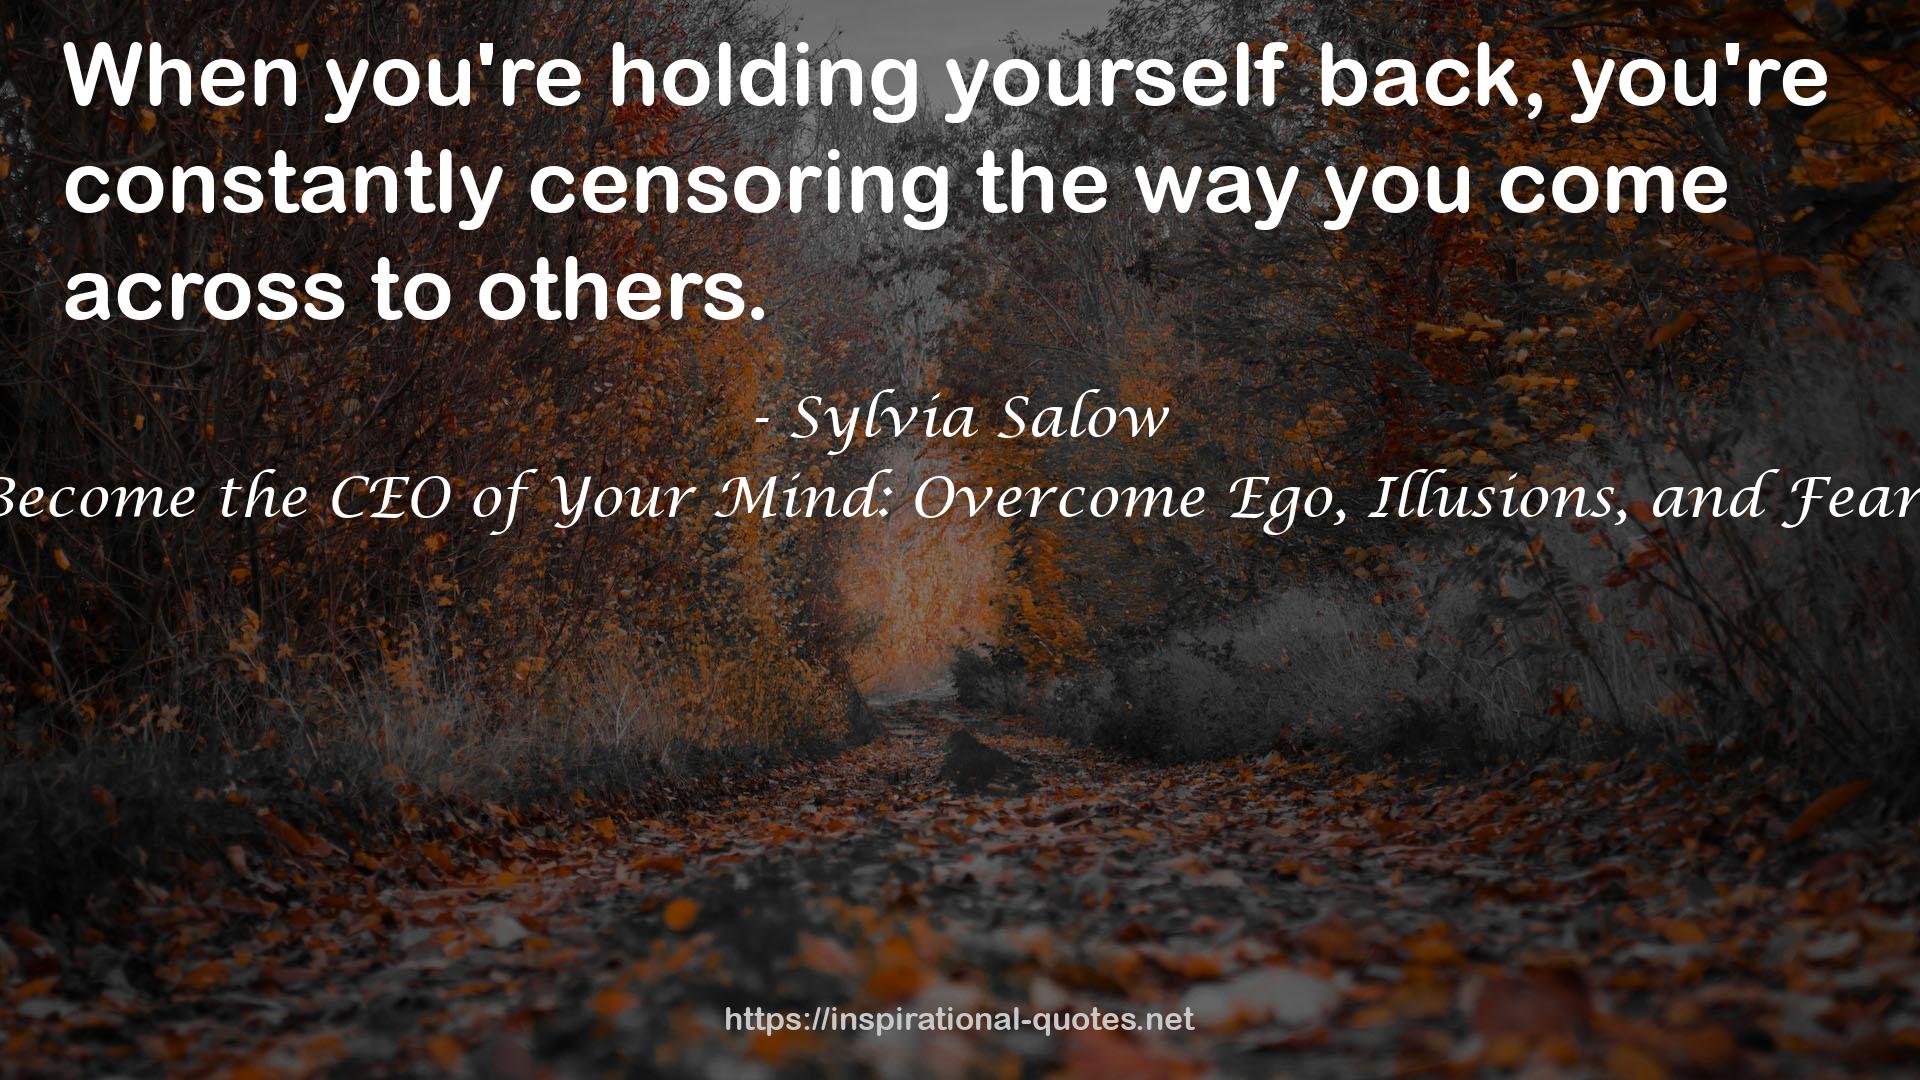 Become the CEO of Your Mind: Overcome Ego, Illusions, and Fears QUOTES